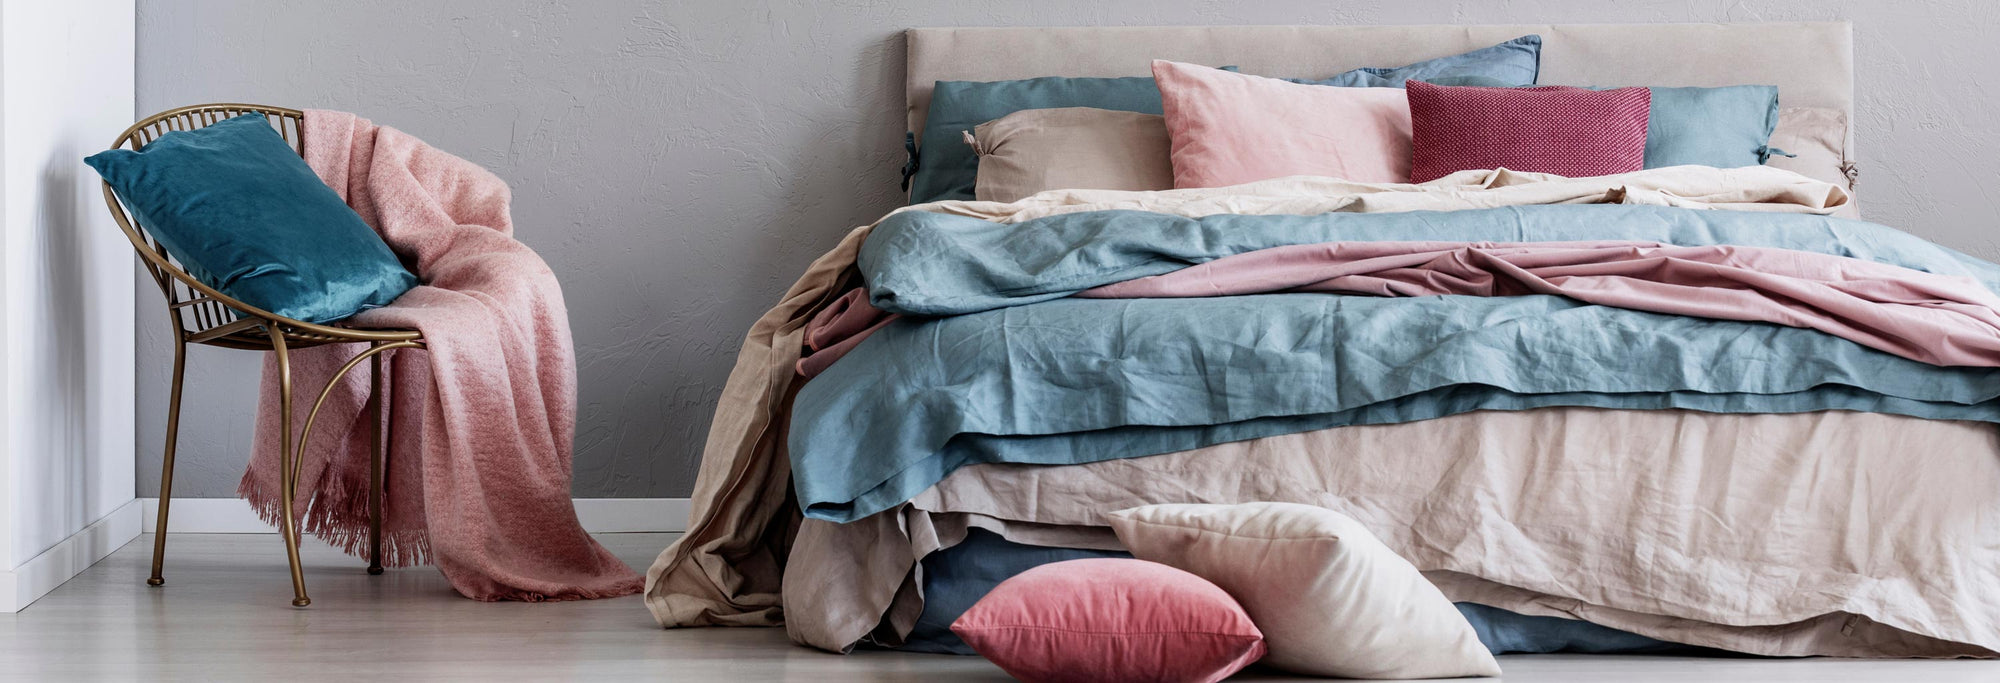 Best Selling Duvet Covers Collection by Leruum London